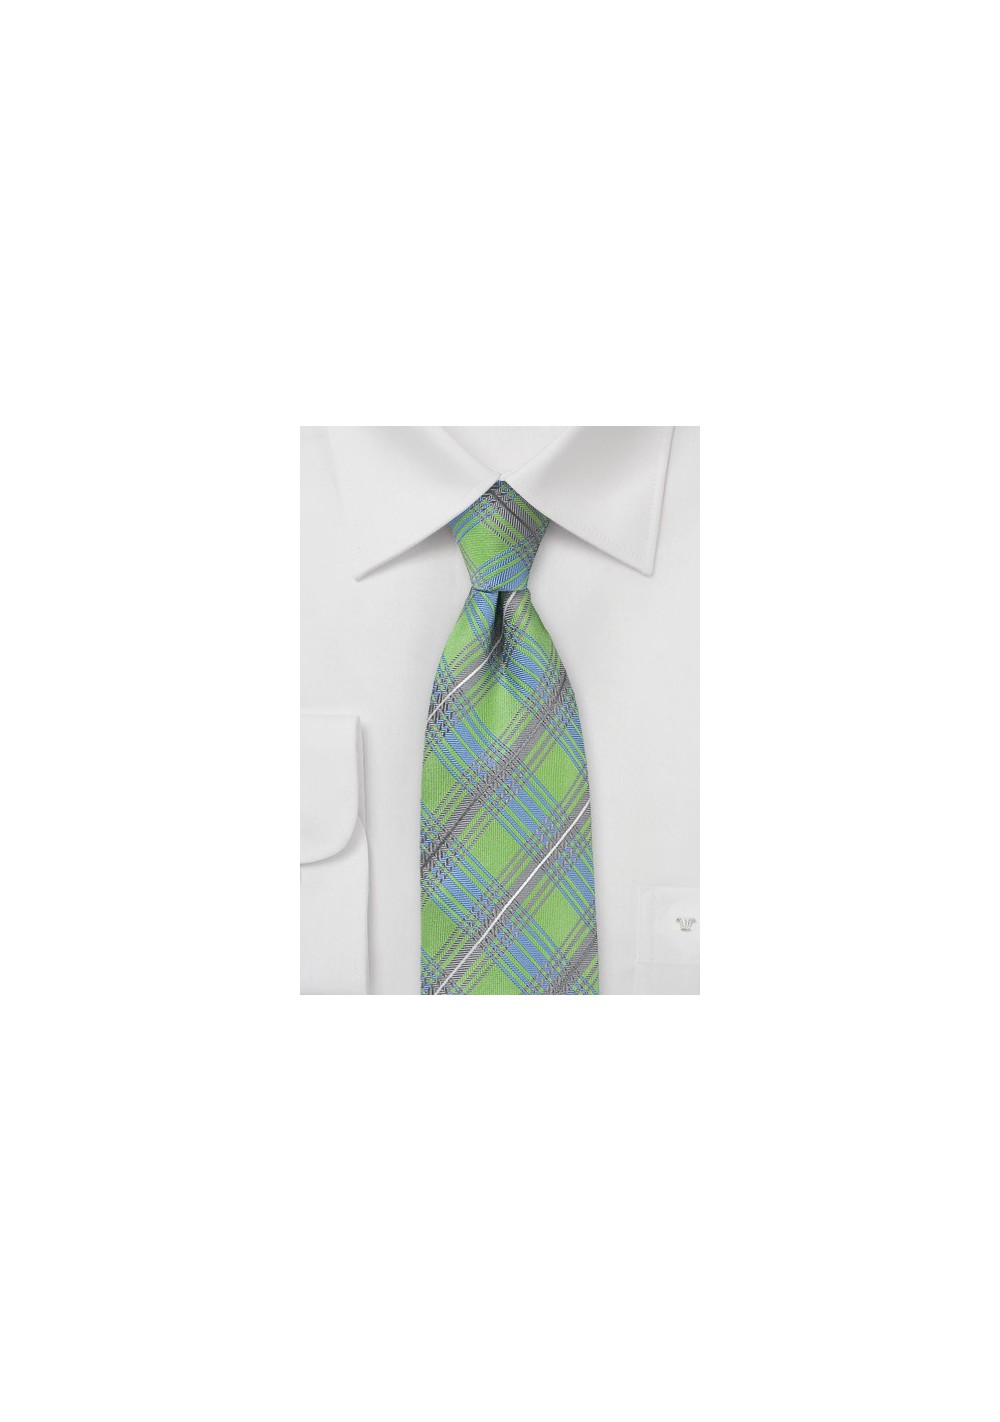 Plaid Tie in Lime, Silver, and Light Blue